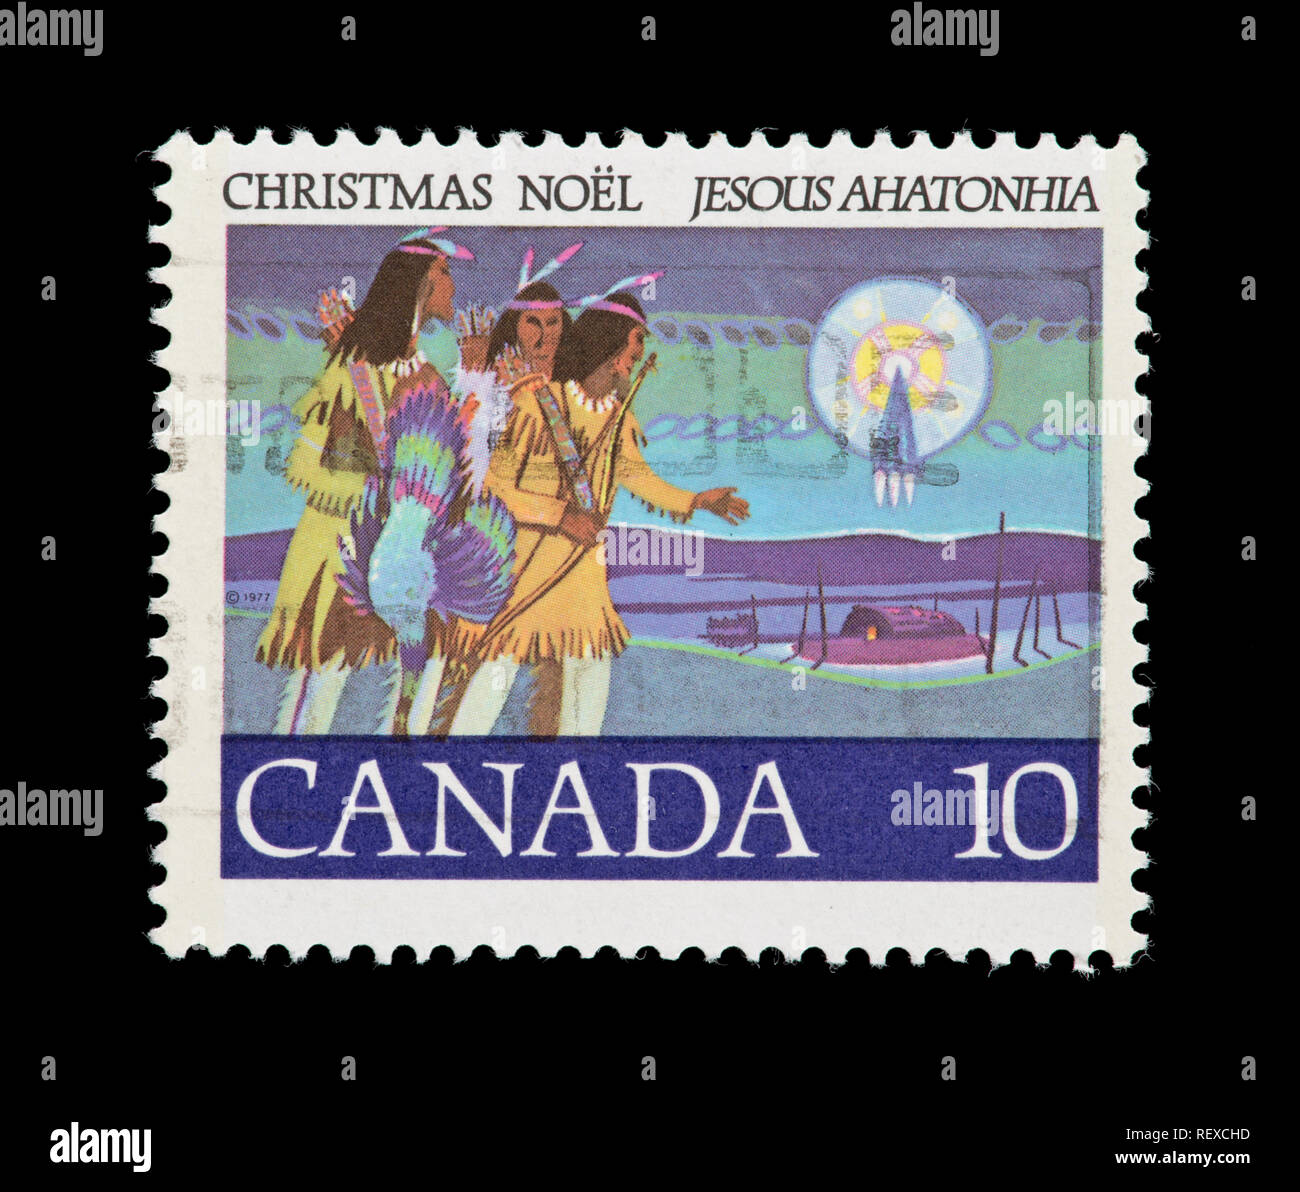 Postage stamp from Canada depicting hunters following a star. Stock Photo